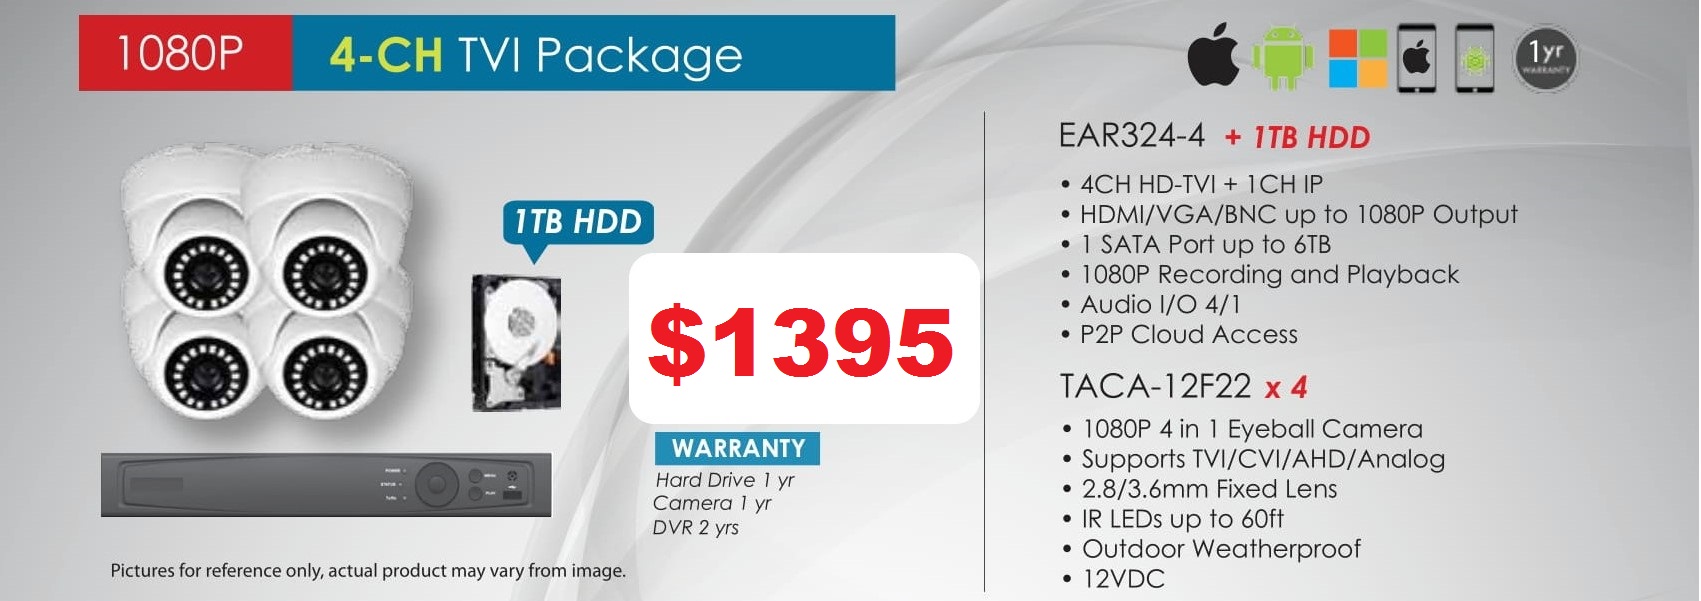 1080p-4ch-pack-2 New Promo Packages